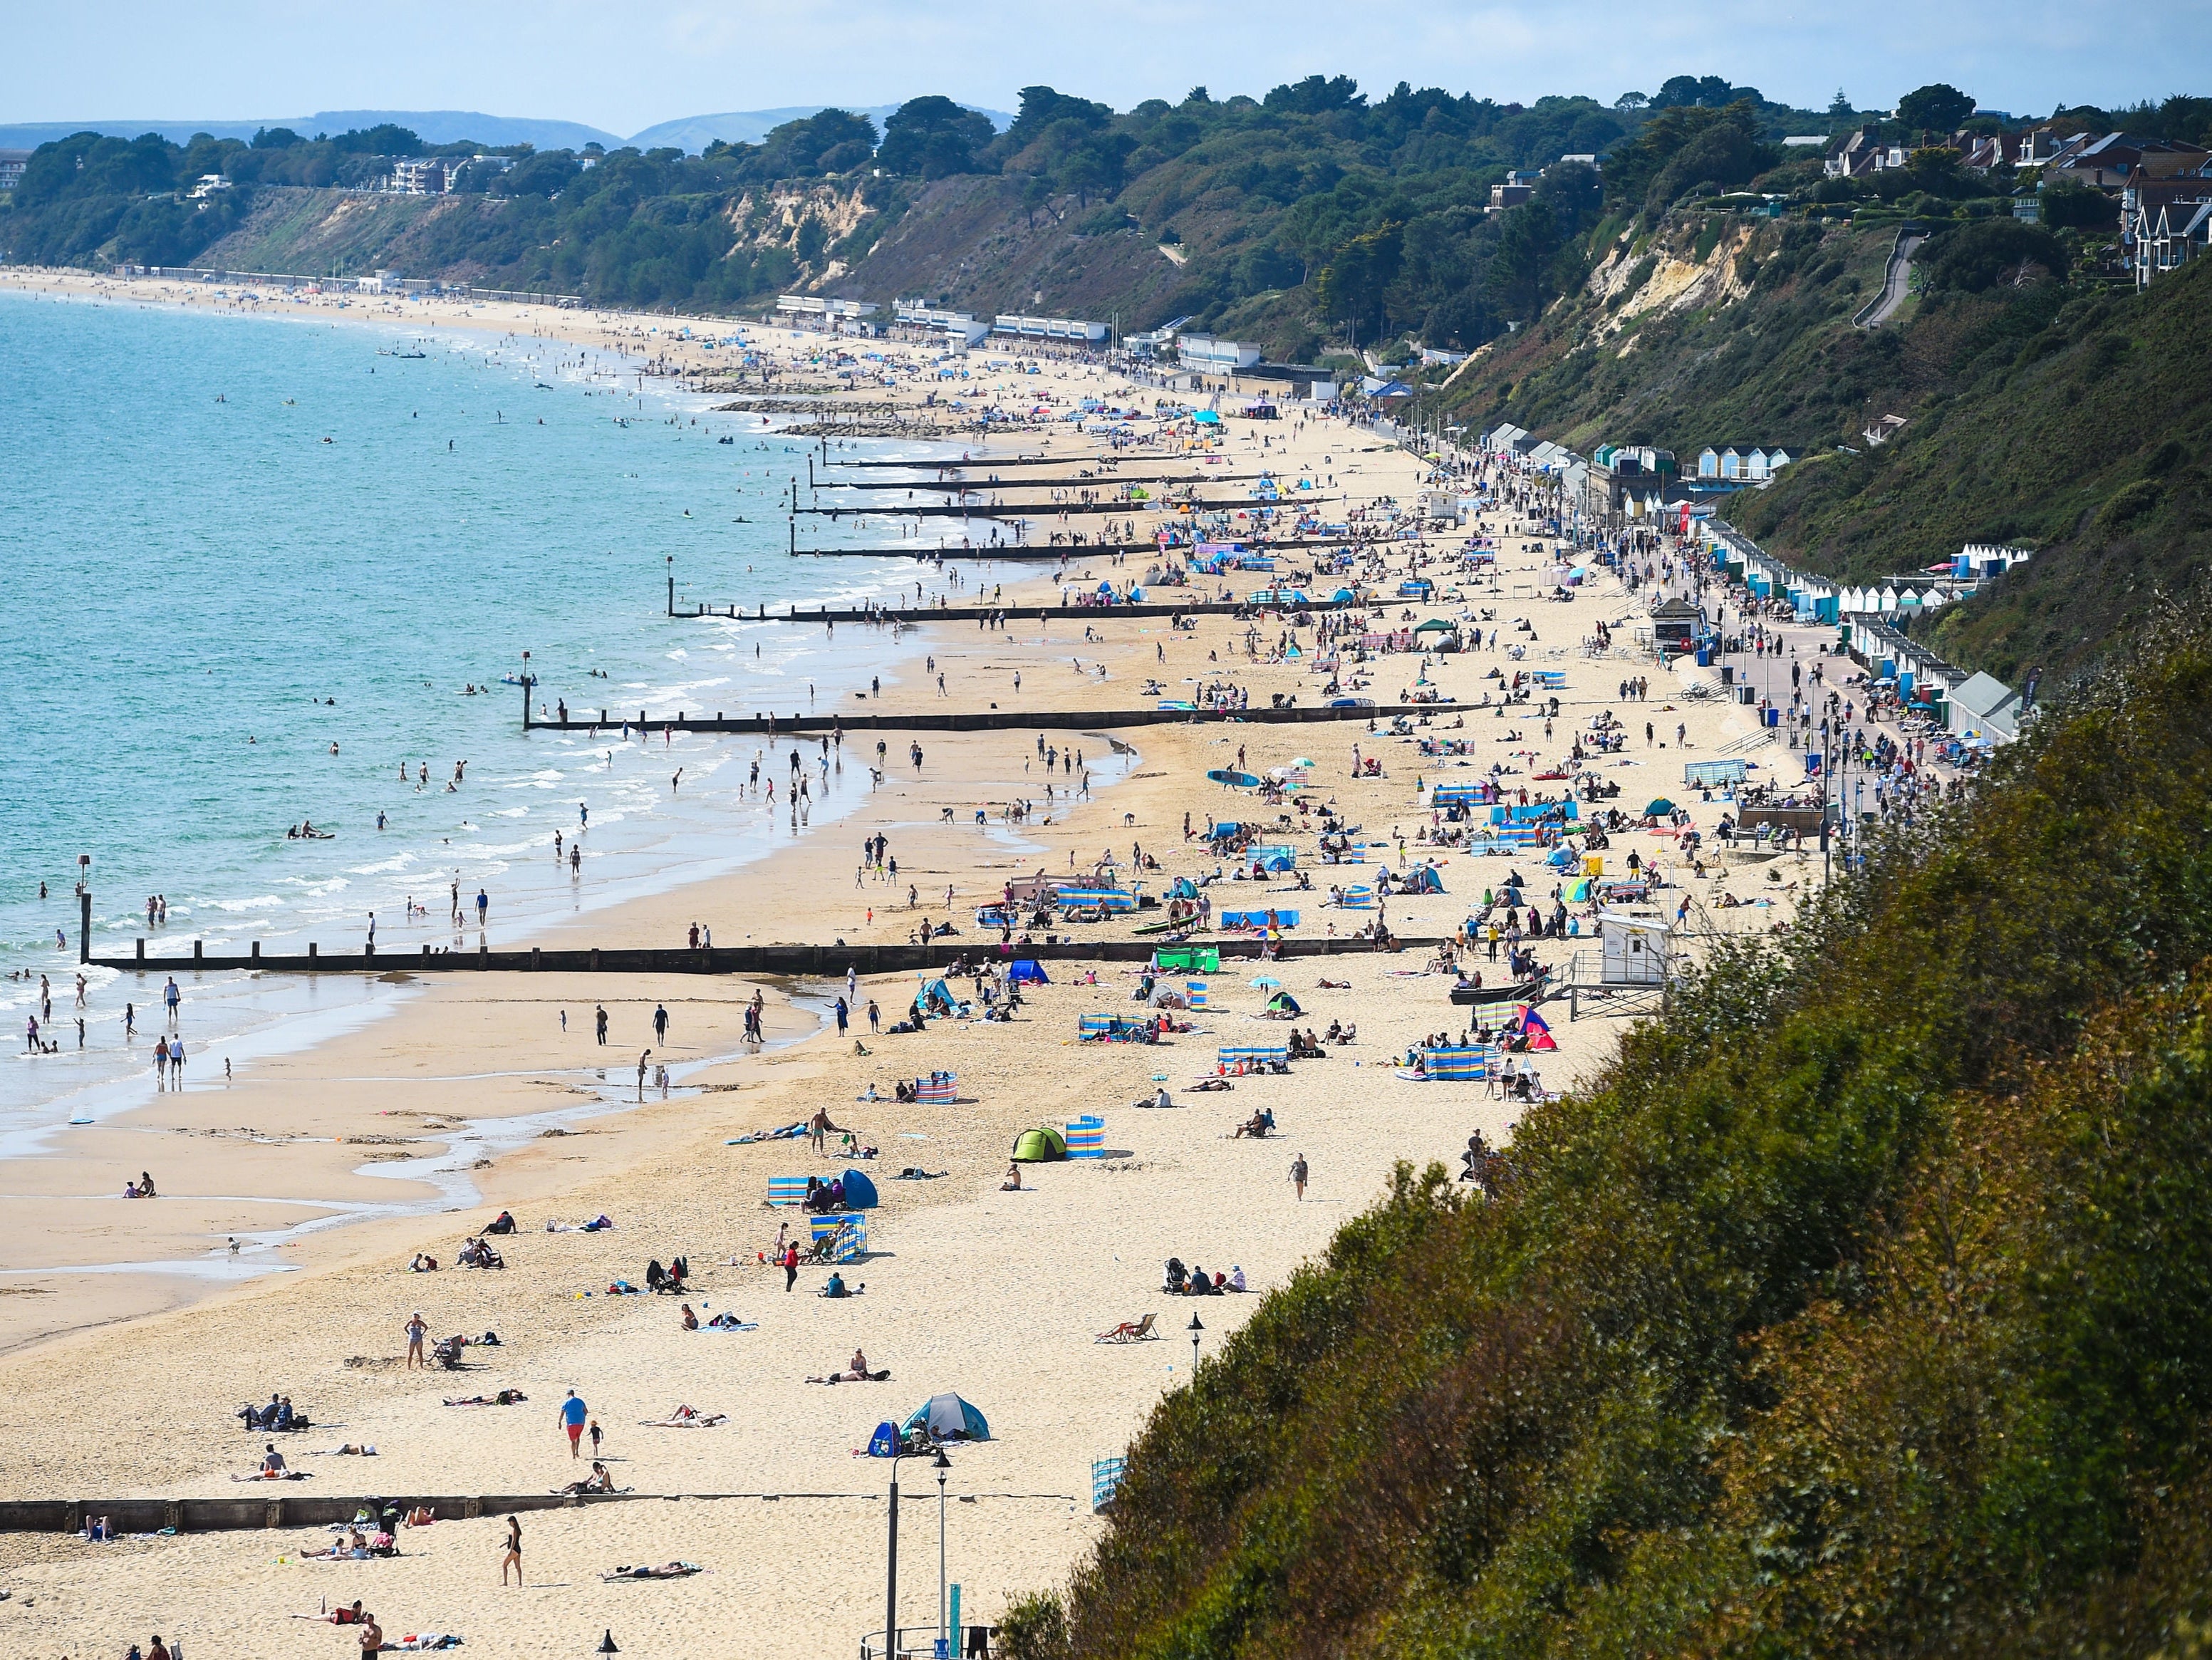 A number of beaches in Dorset recorded the highest numbers of sewage polution incidents, according to Surfers Against Sewage